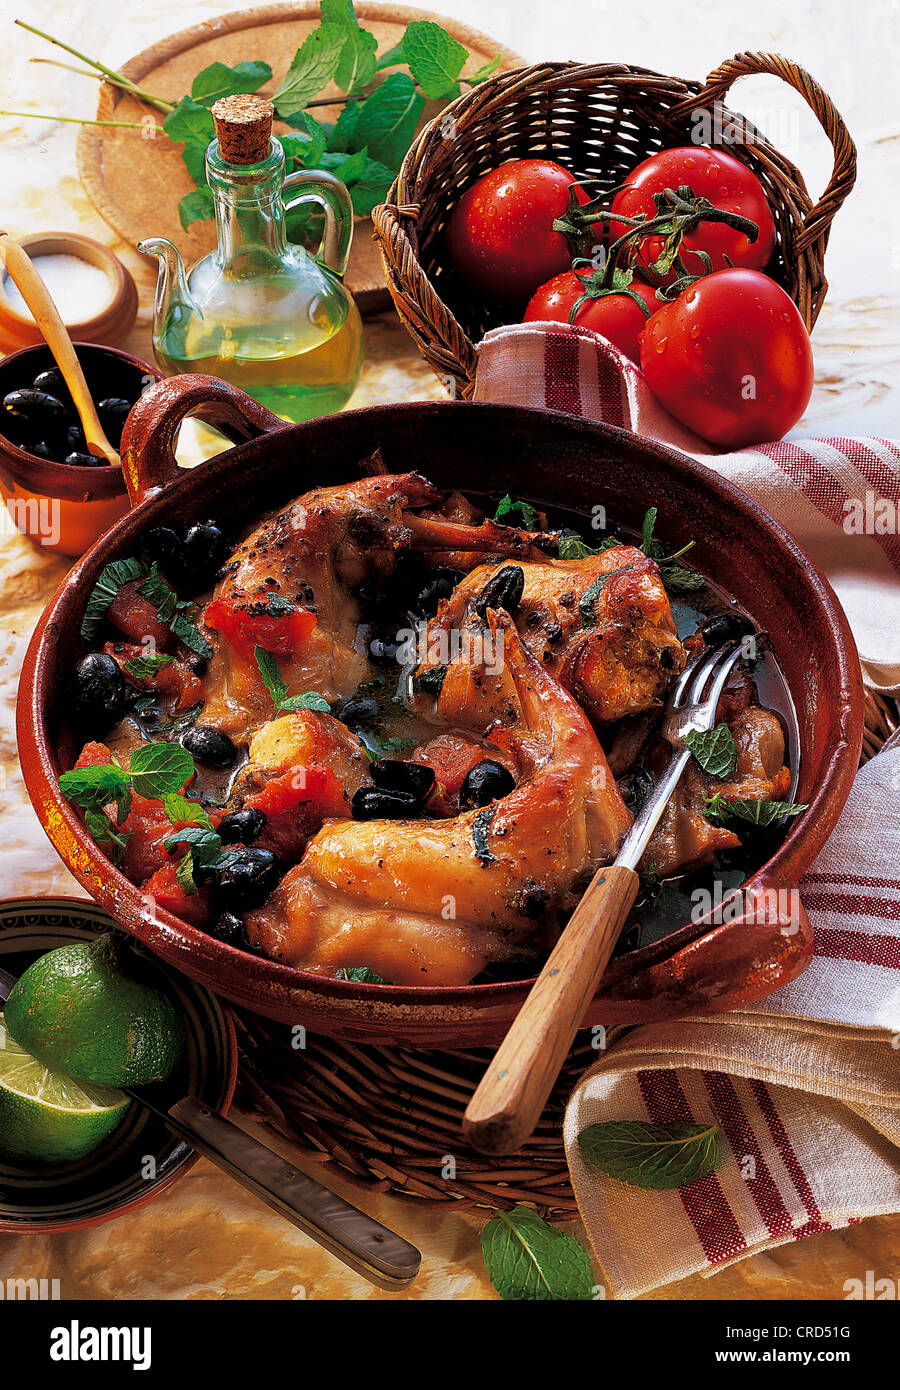 Rabbit with olives and tomatoes, Tunisia. Stock Photo